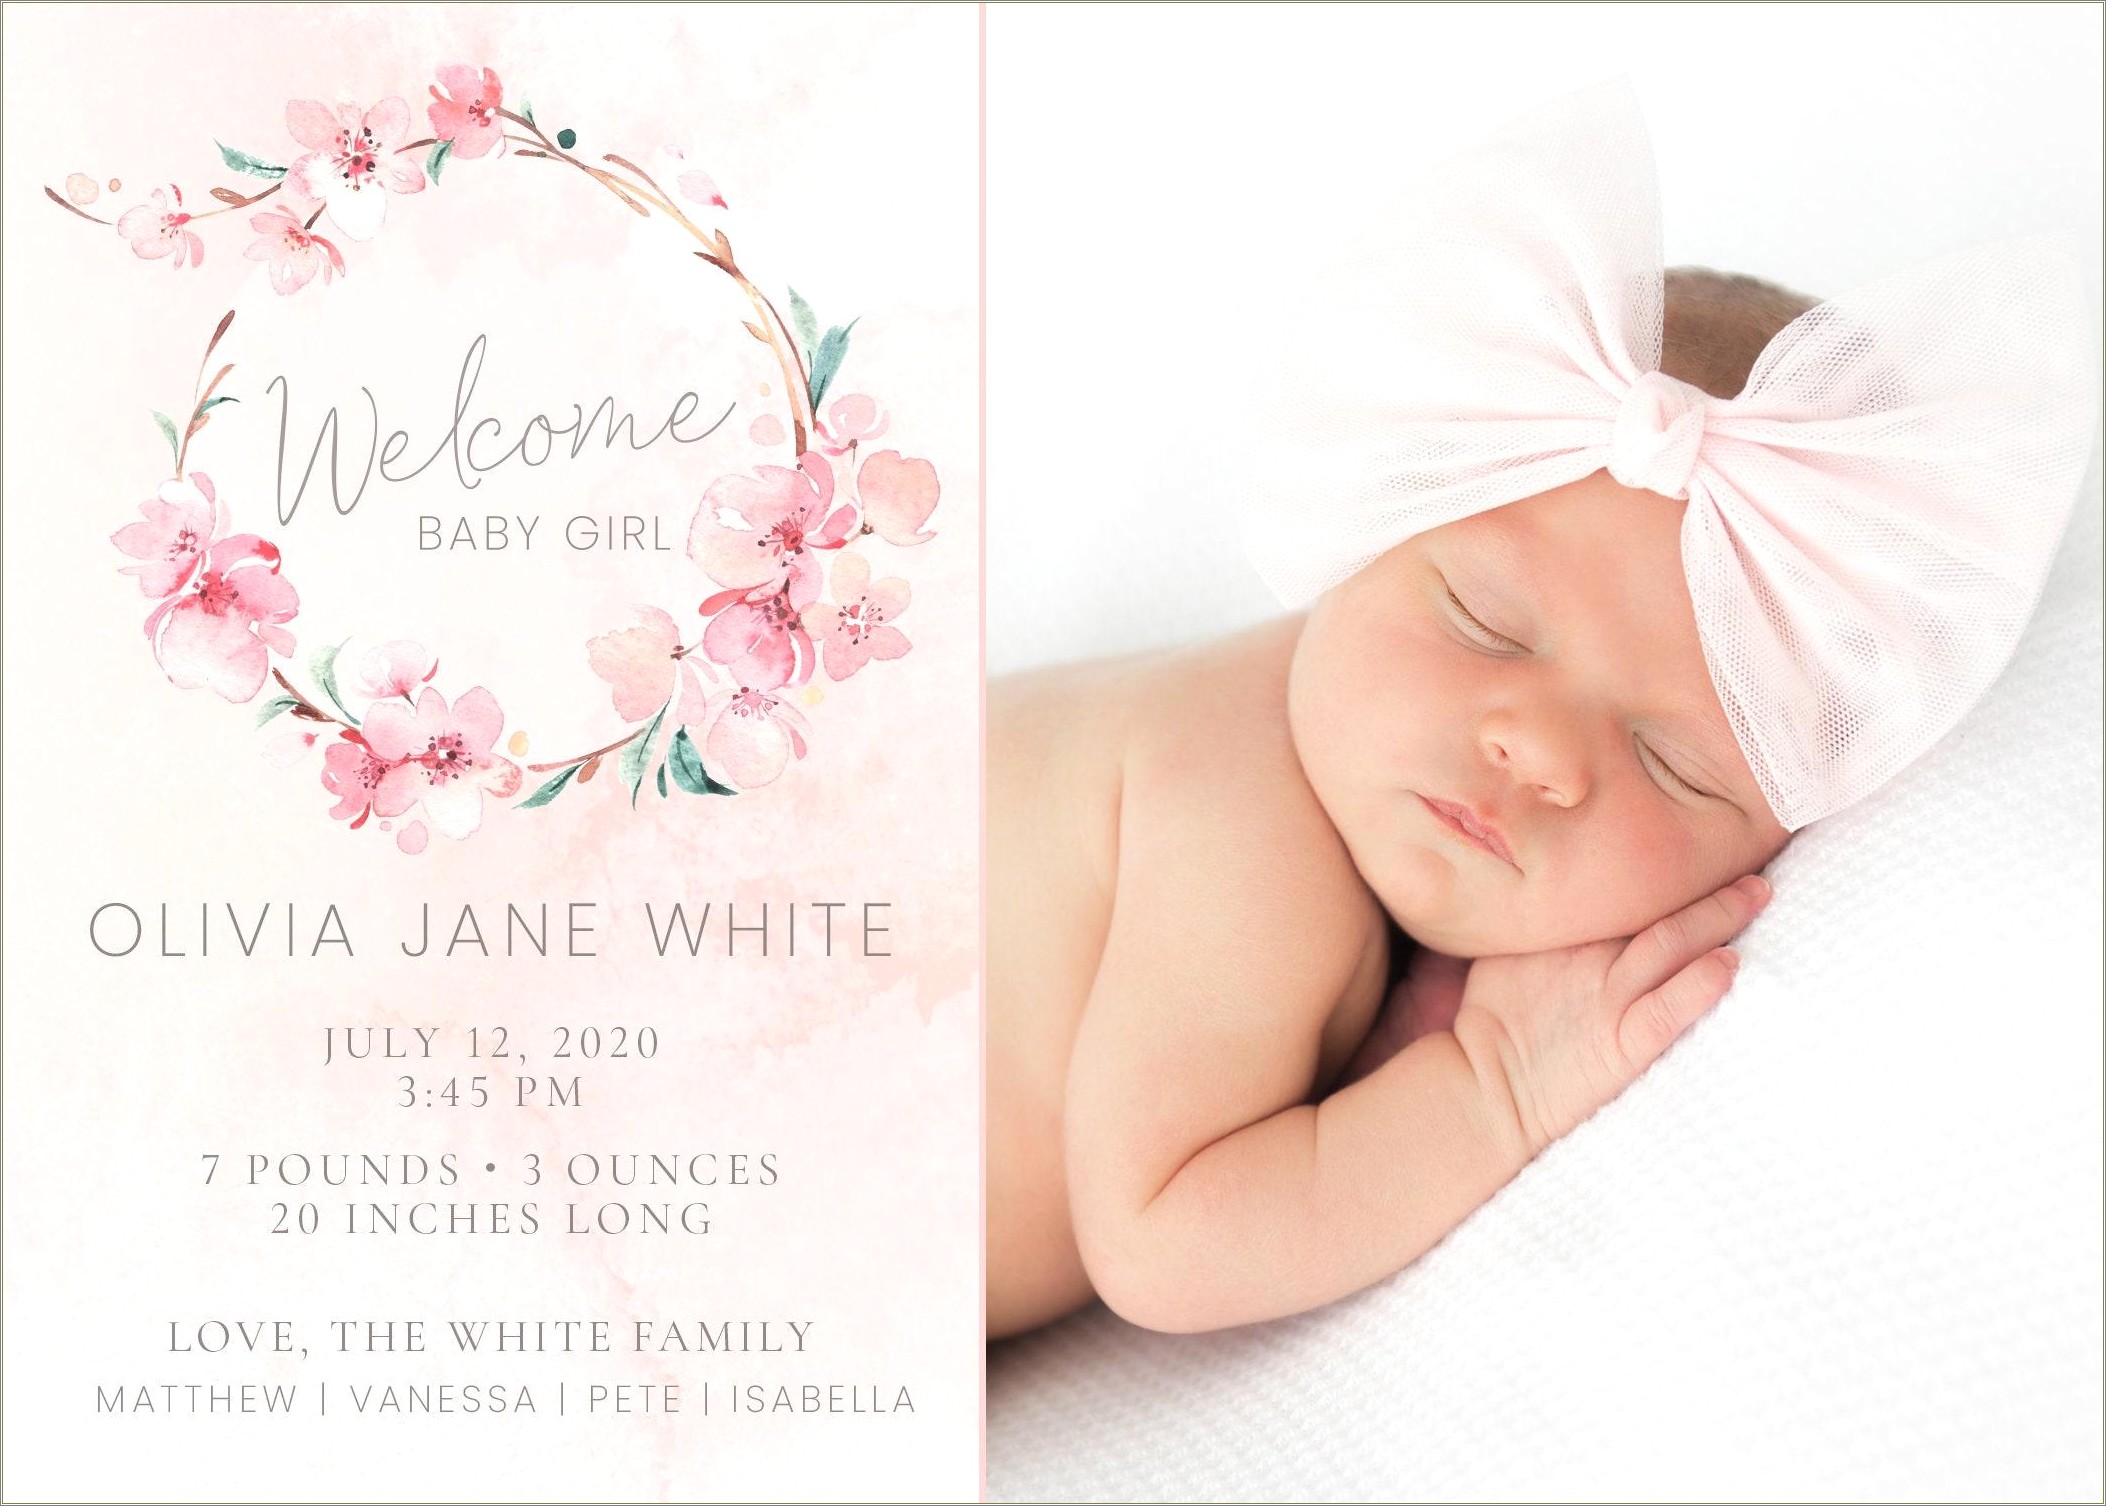 Free Baby Girl Announcement Photoshop Templates